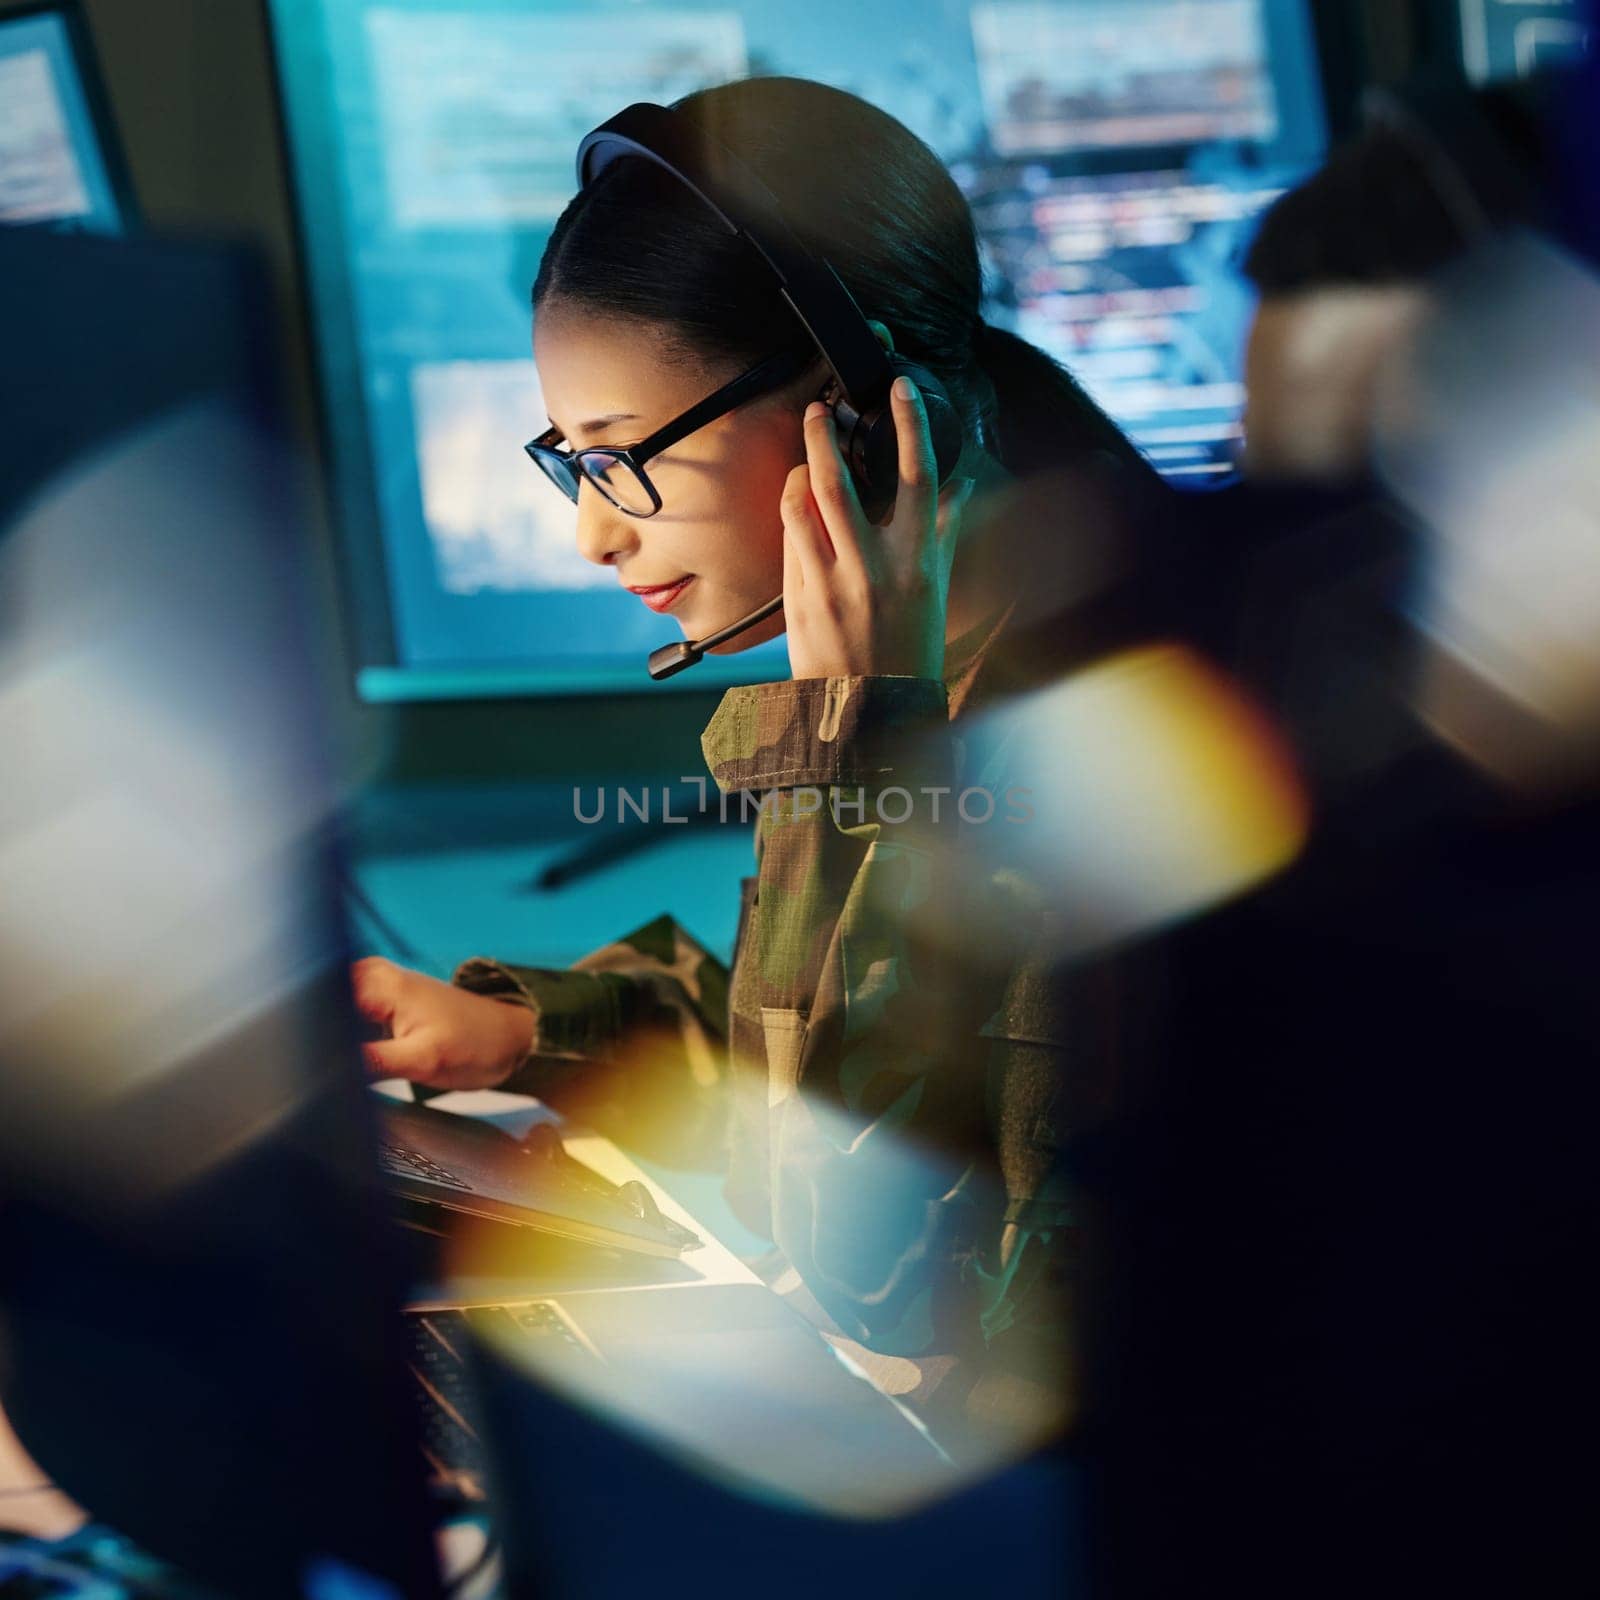 Military command center, headset and woman with communication, computer and technology. Security, global surveillance and soldier with teamwork in army office at government cyber data control room